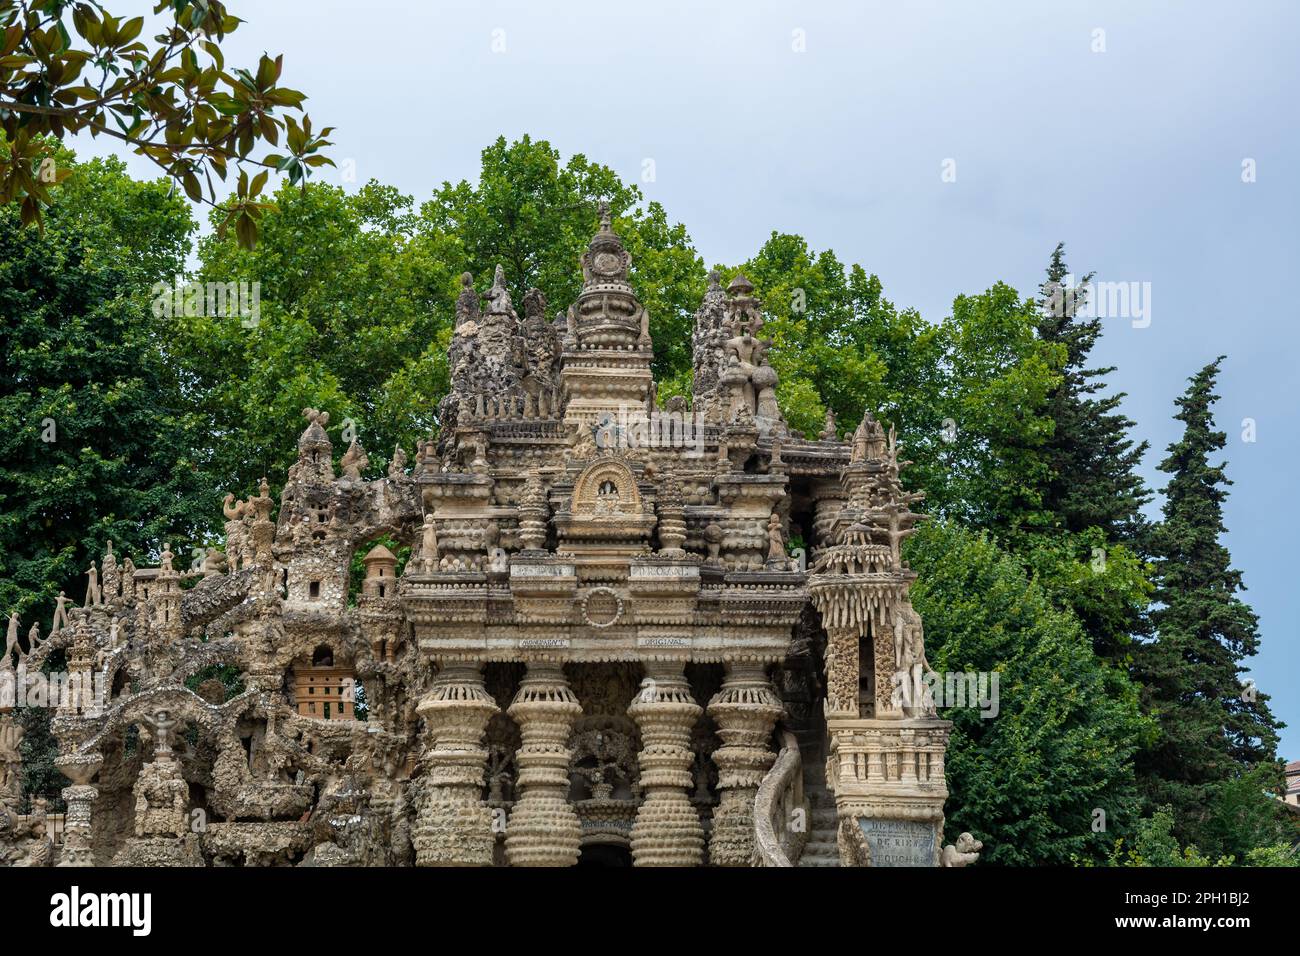 Hauterives, France - August 05, 2022 : The Postman Cheval s Ideal Palace is a unique architectural wonder located in Hauterives, built by a postman na Stock Photo